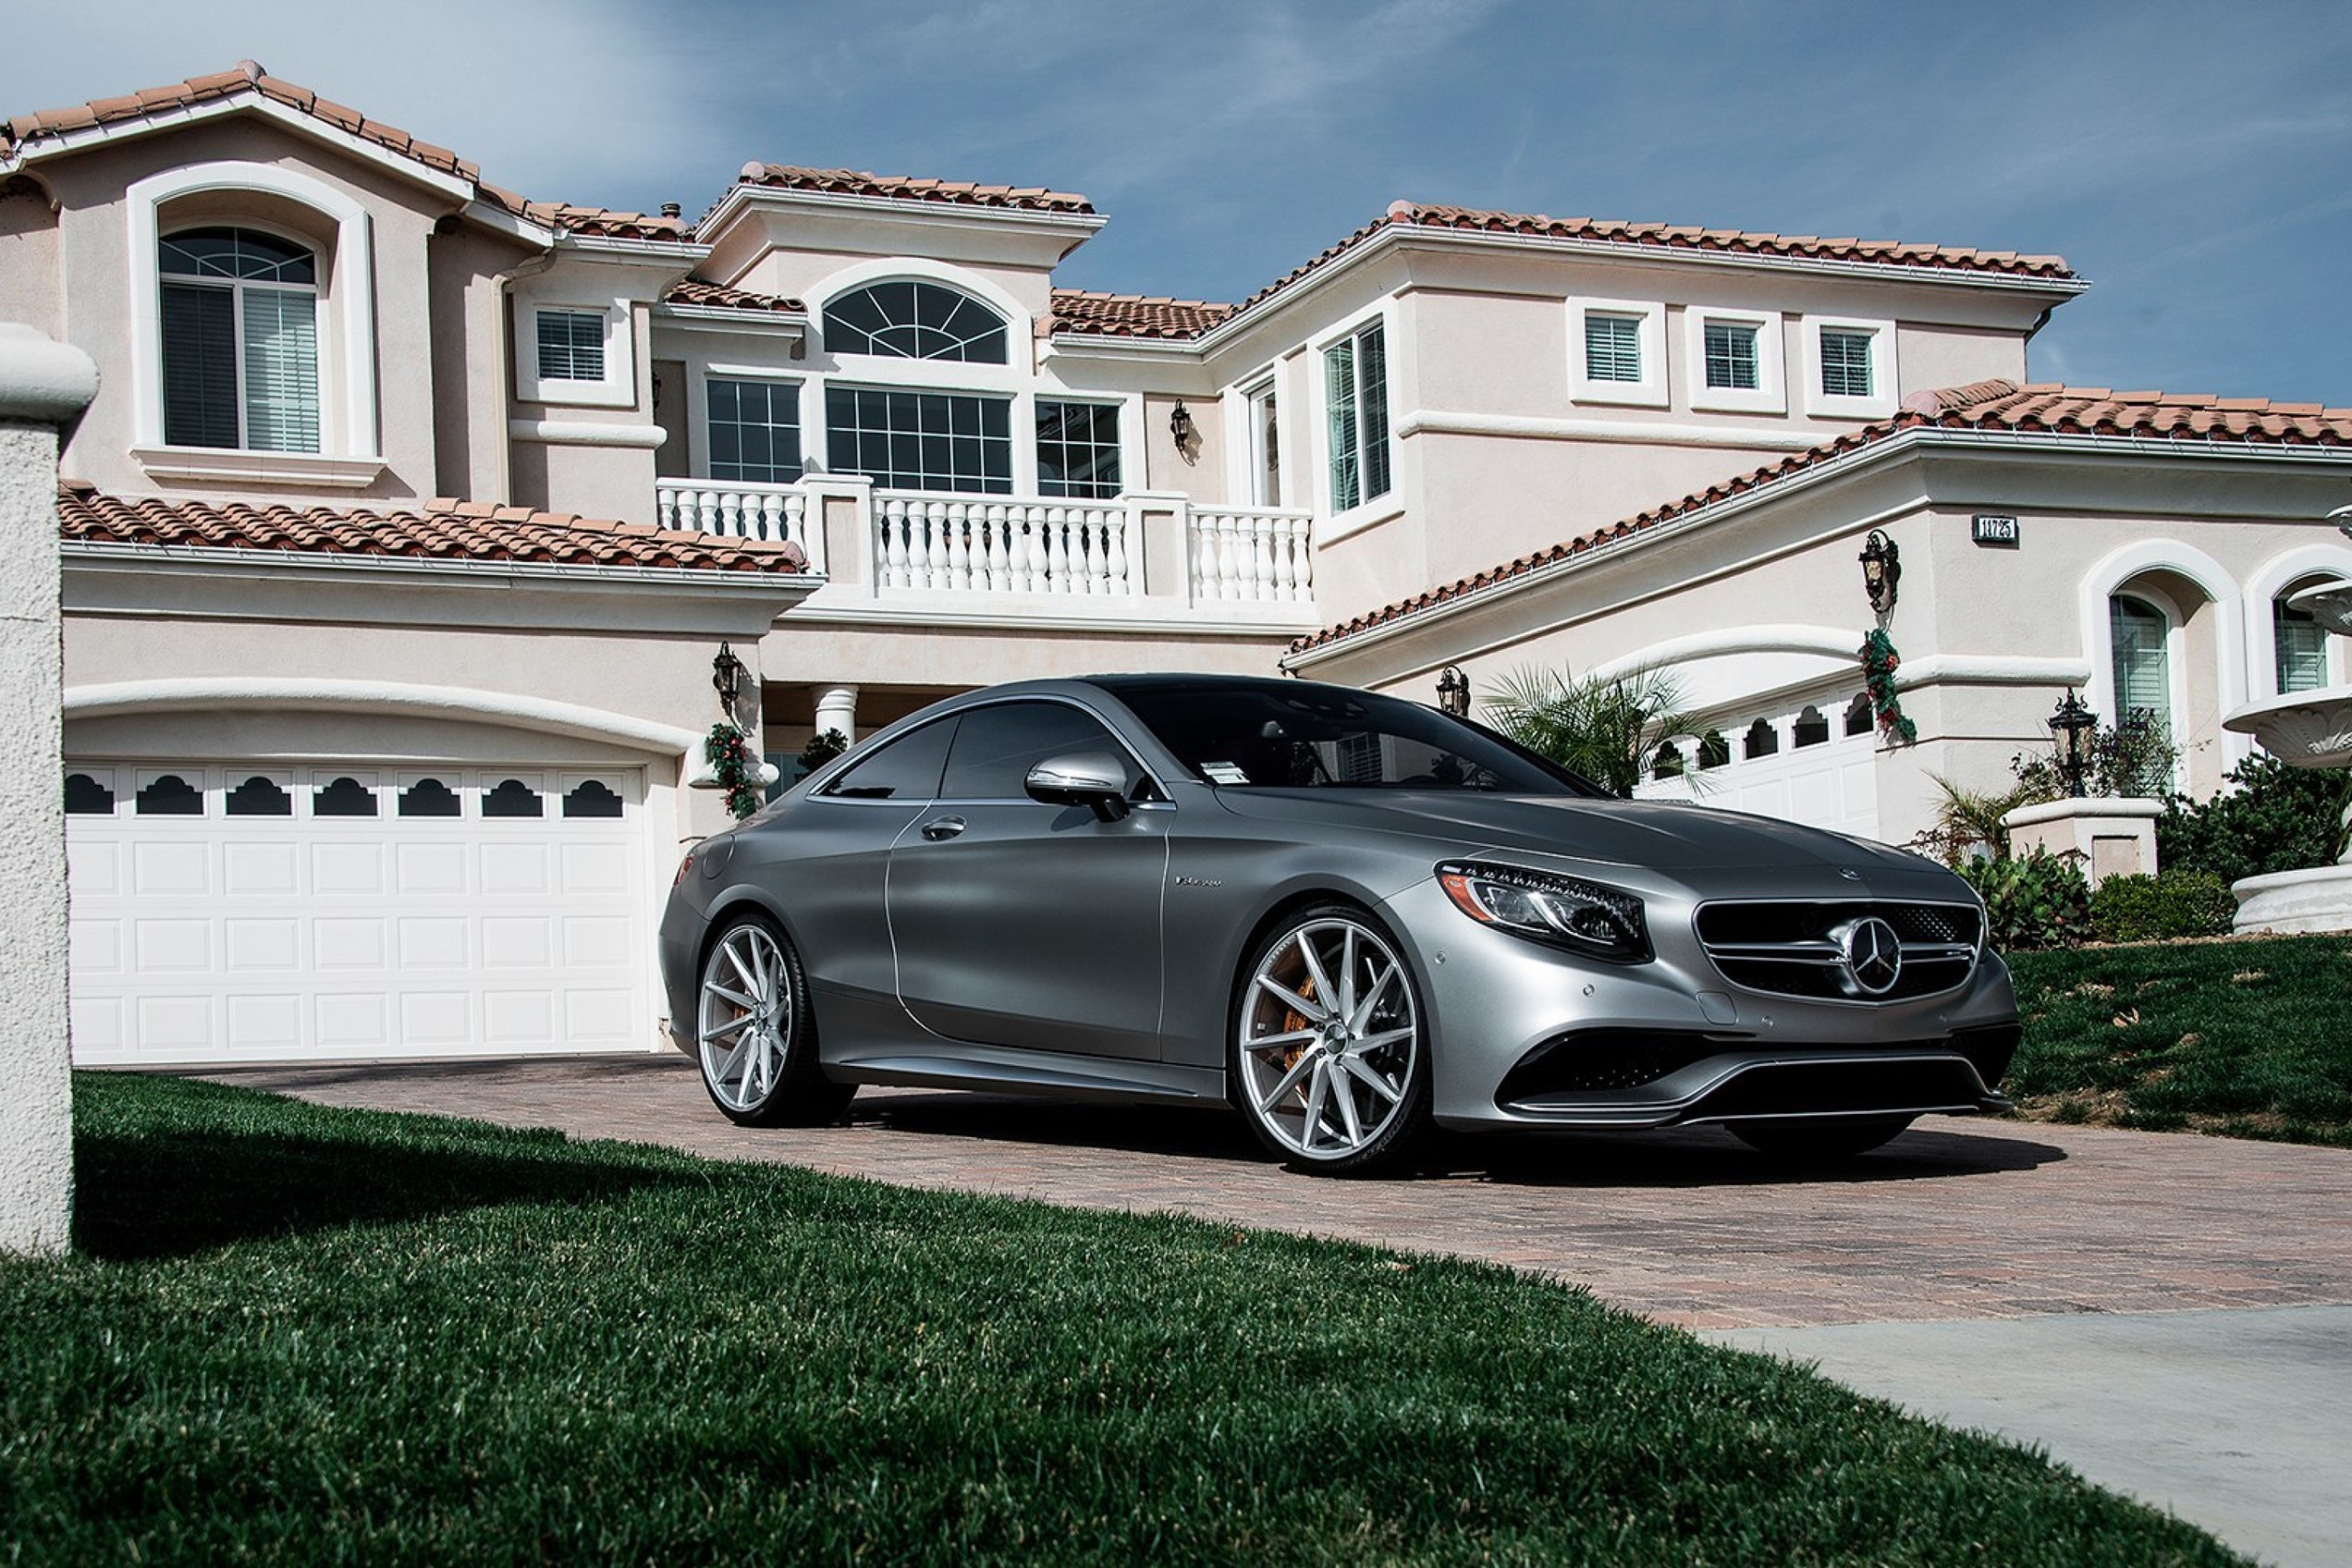 Mercedes Benz S63 AMG Coupe wallpaper 2880x1920